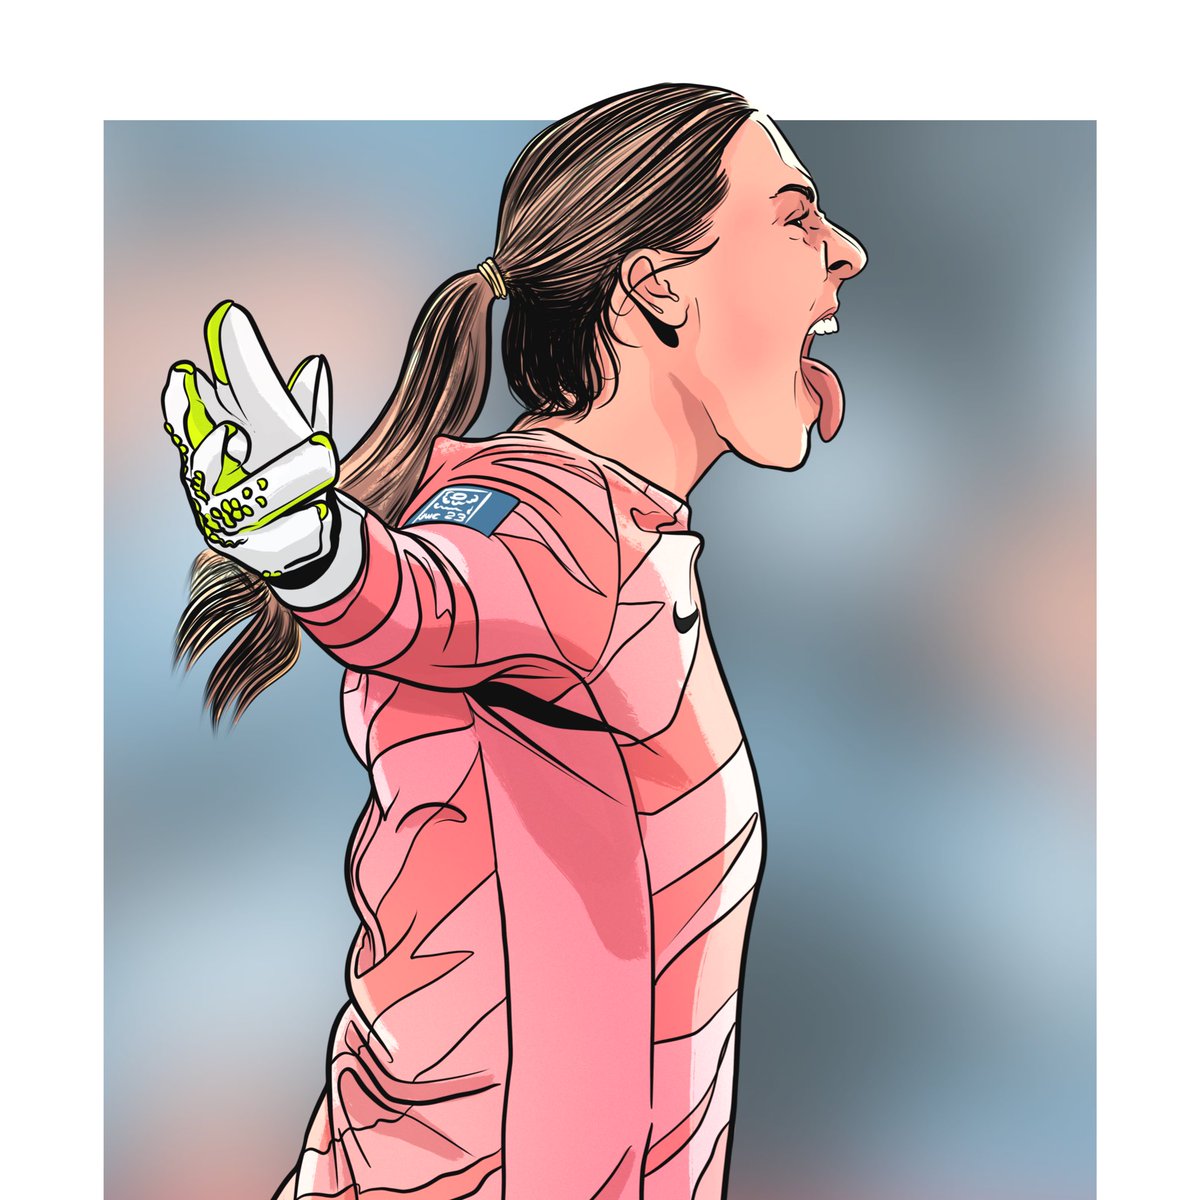 Mary Earps, inspiring a national of young girls to go in goal, saving a penalty in the World Cup final, screaming one of the best Fuck Off’s on the BBC we’ll see for a long time

Golden Glove winner for the #WomensWorldCup 

Available now in the shop #Earps #MaryEarps #Lionesses